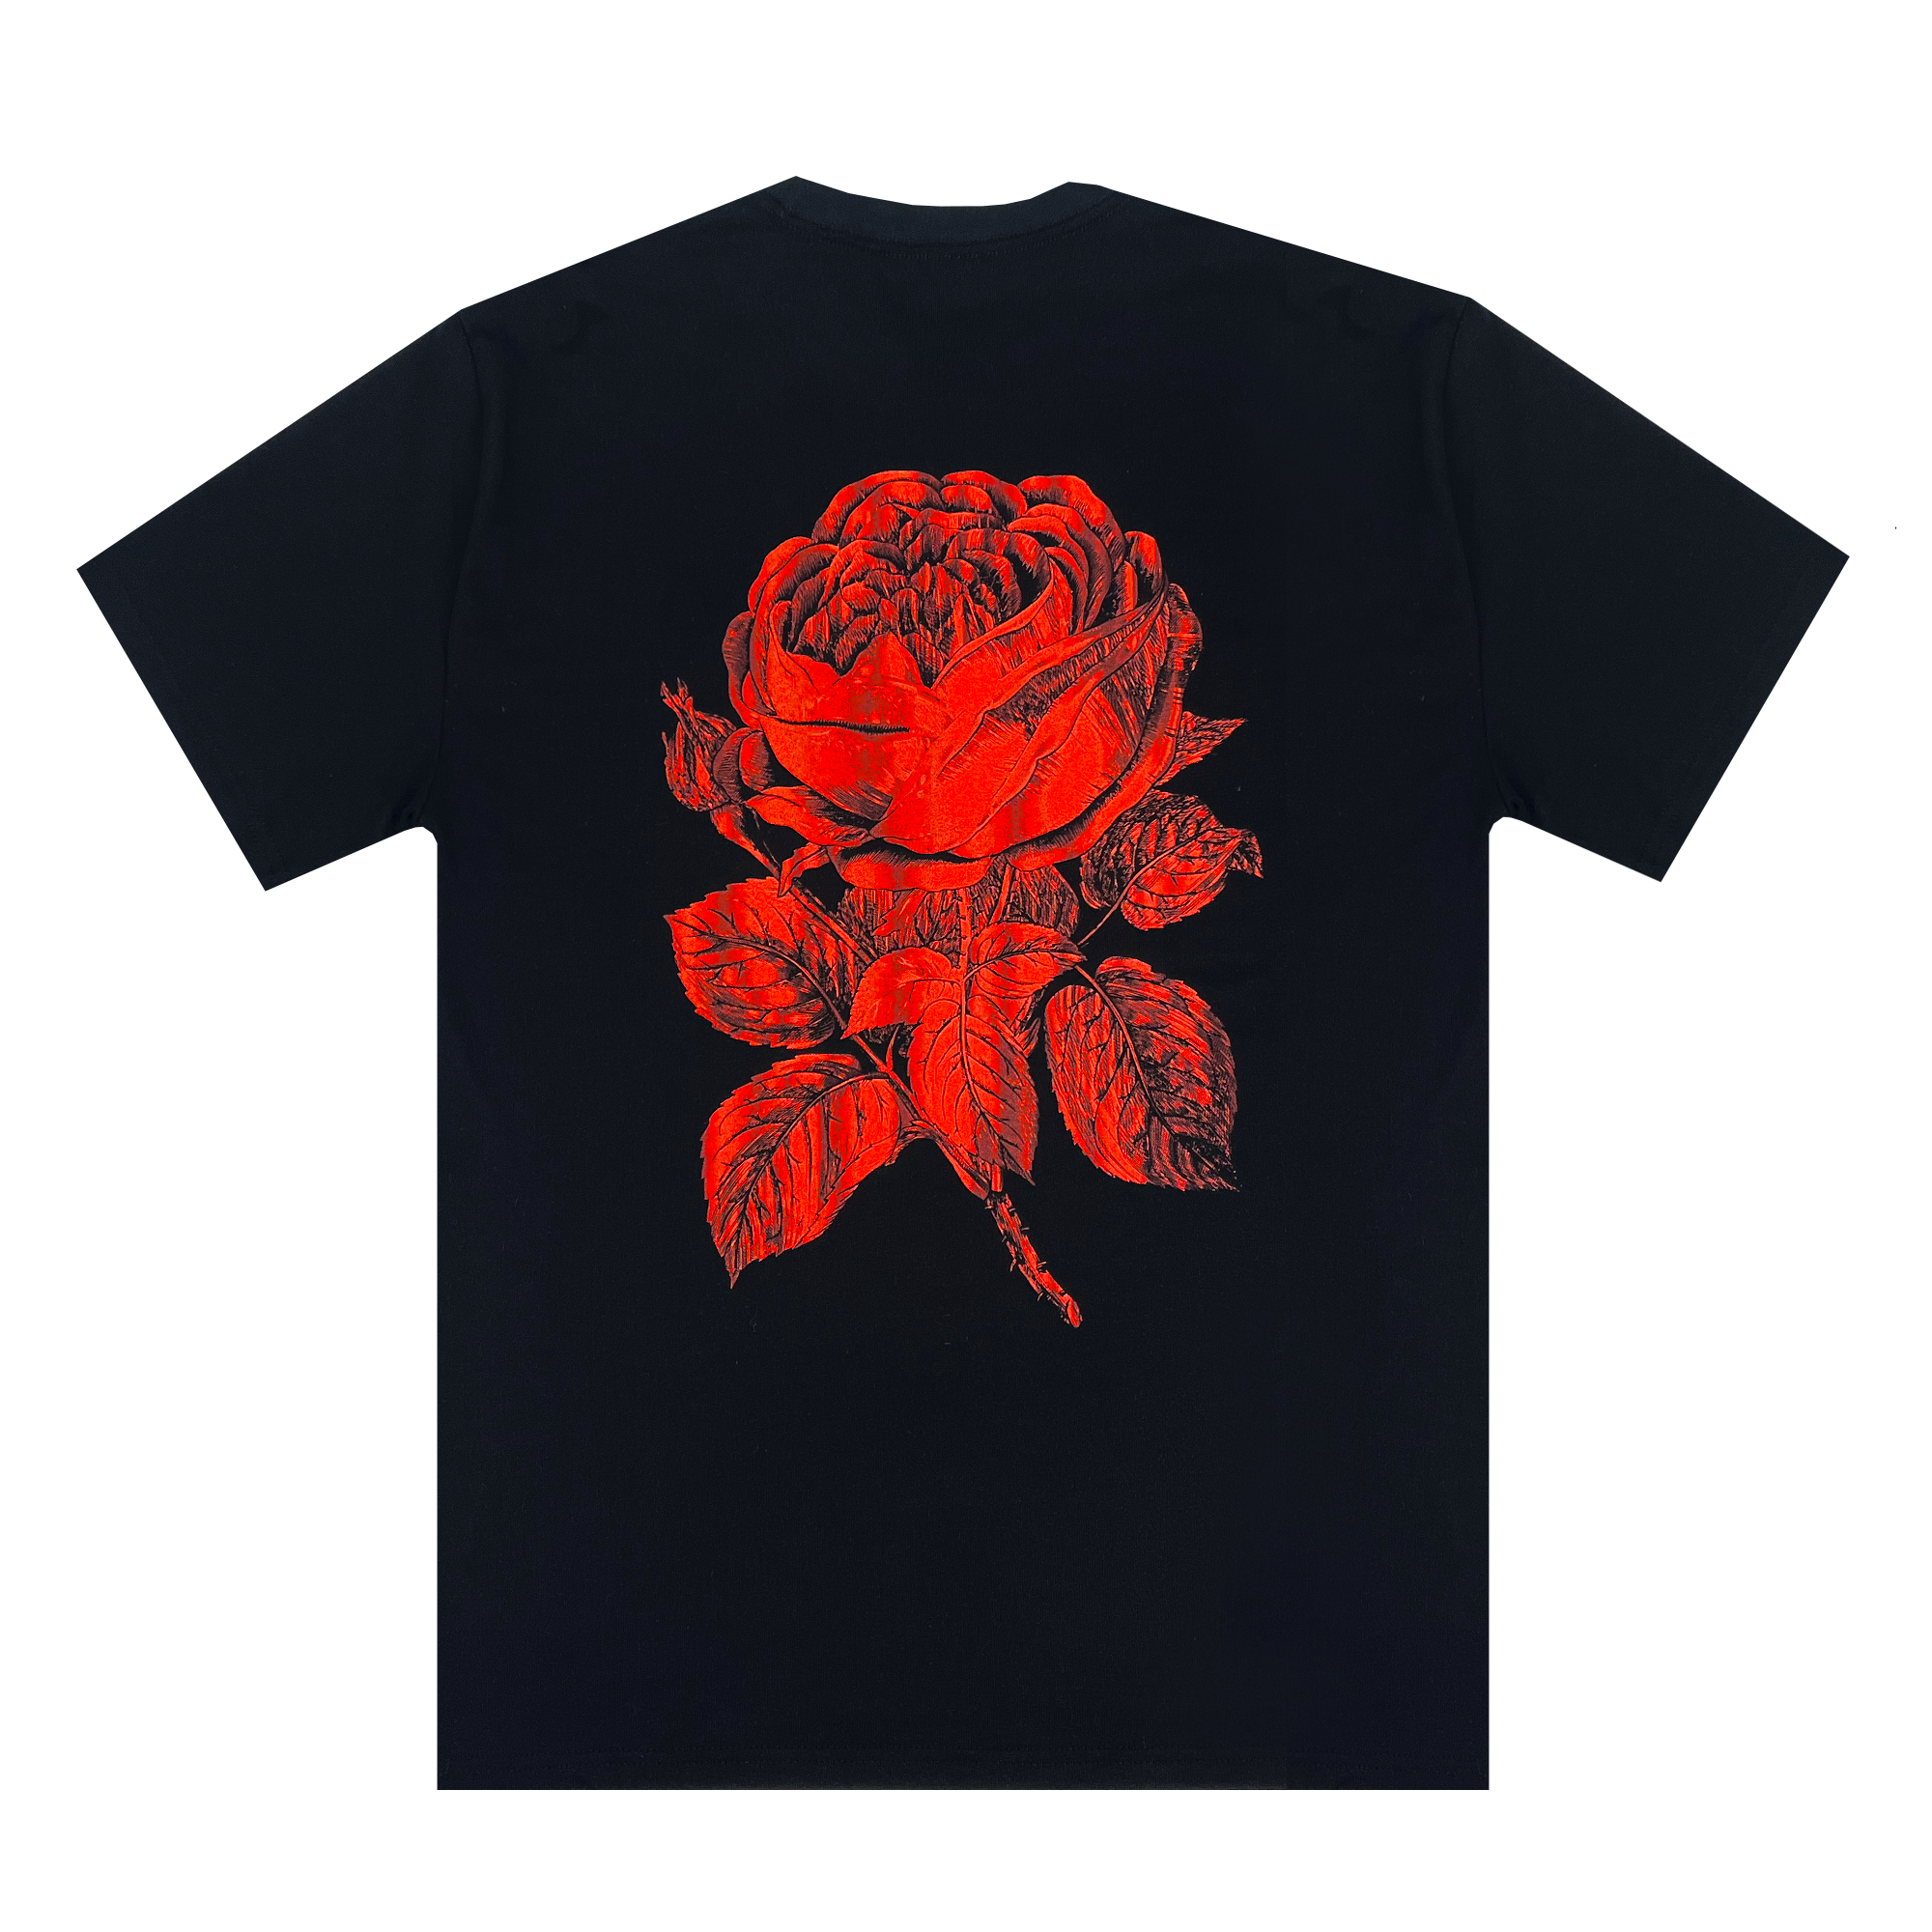 Back view of Black tee with red rose printed center.